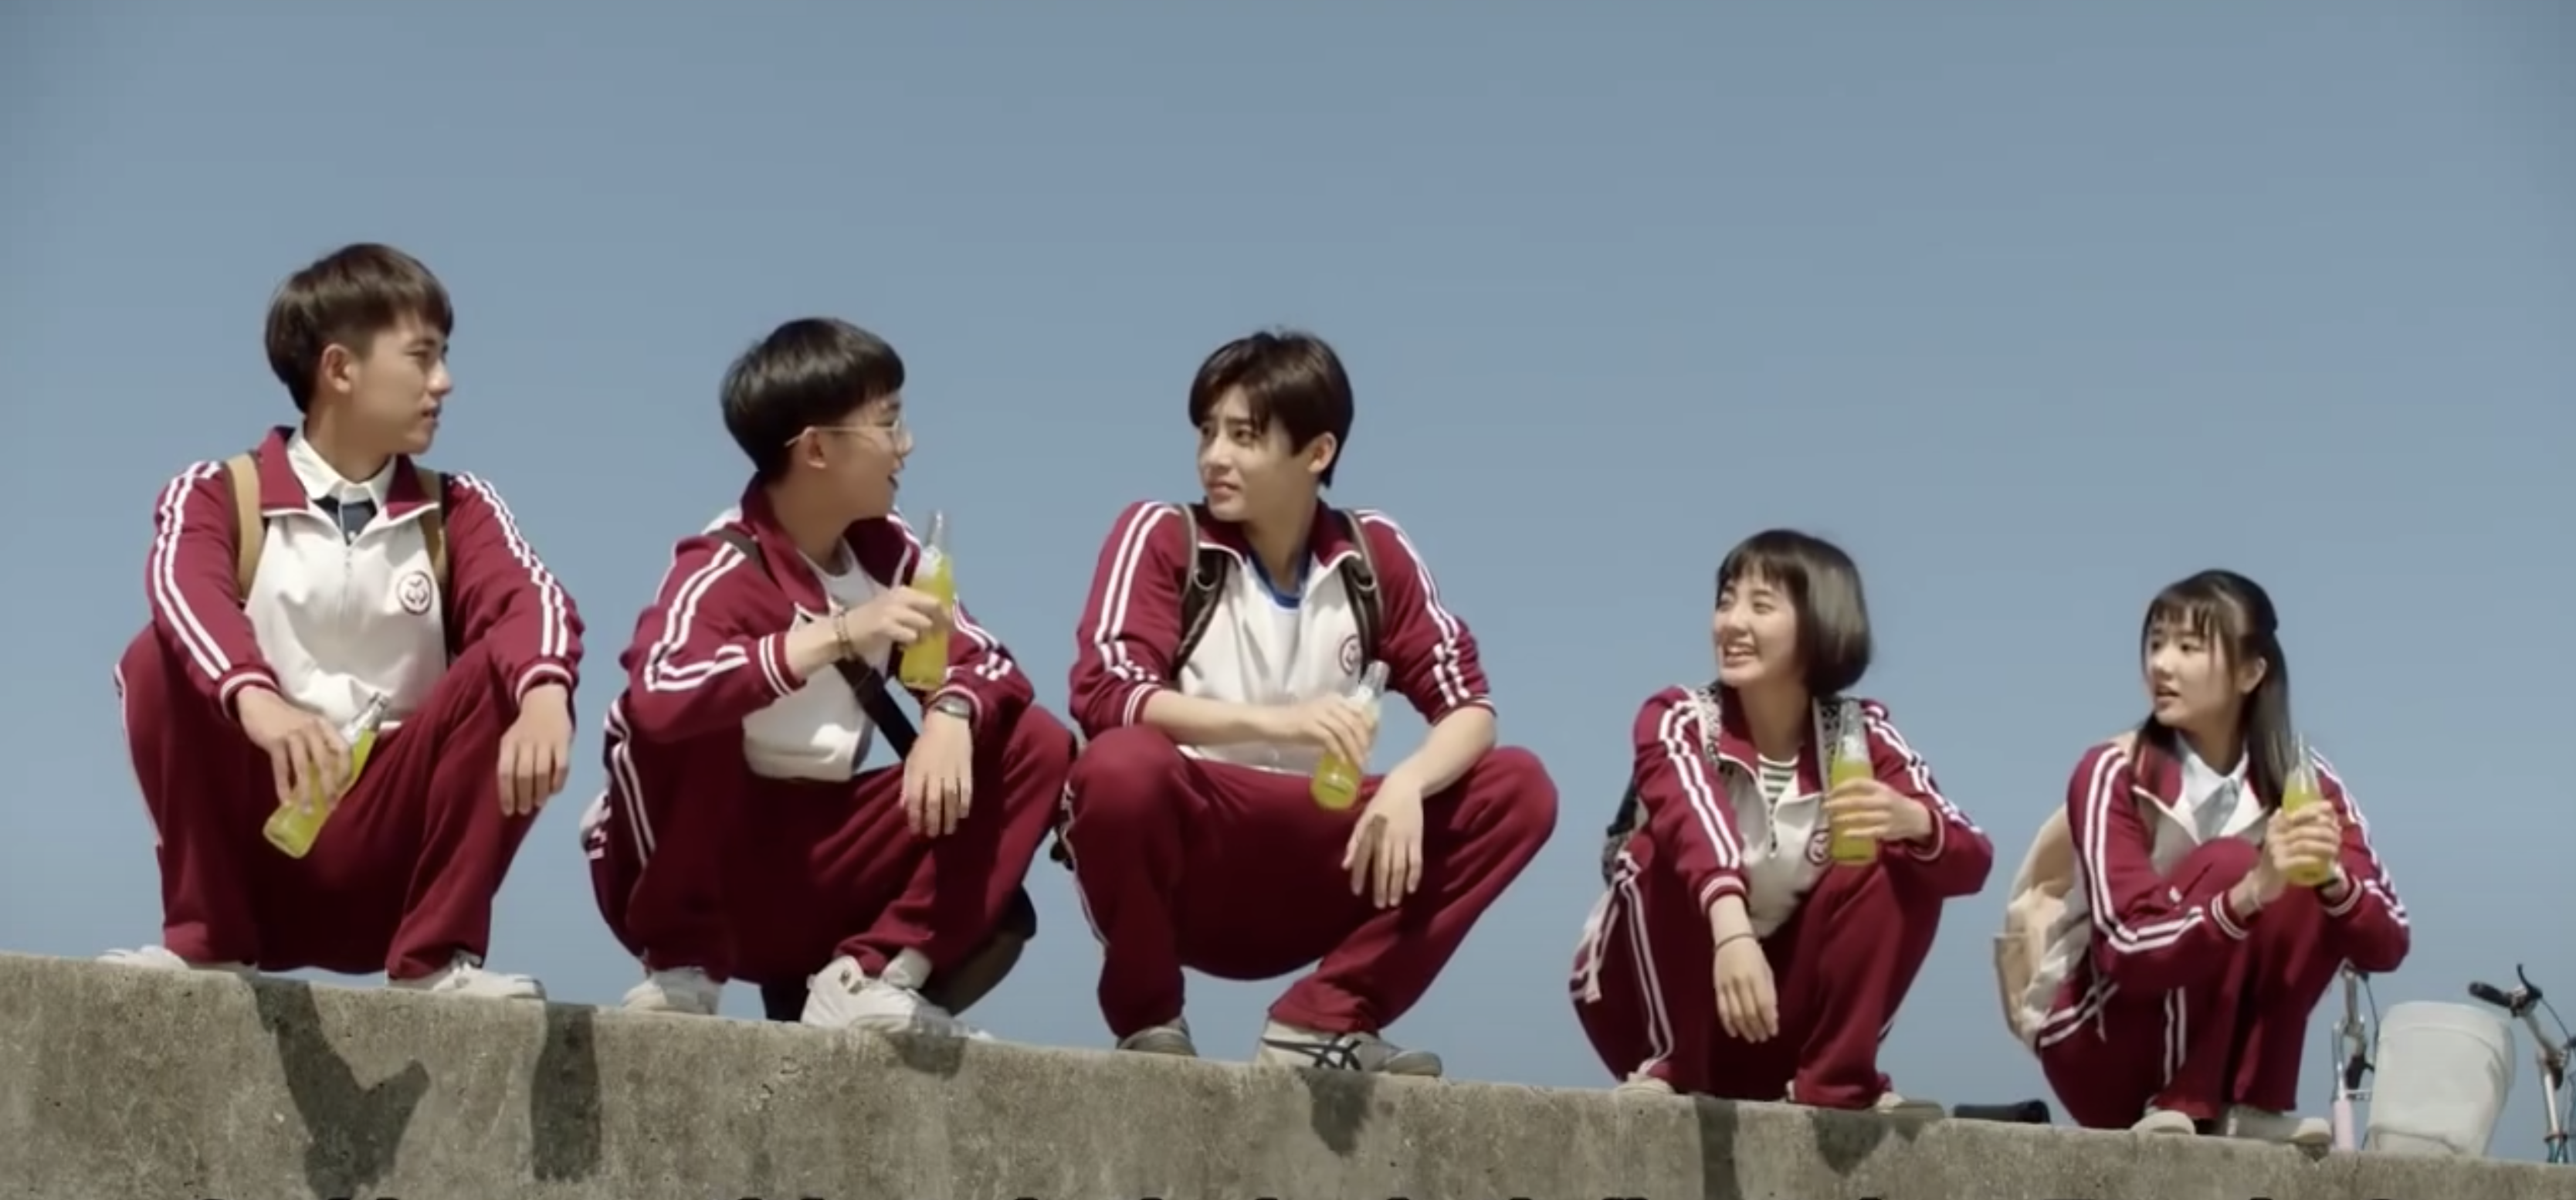 5 reasons why you should watch the C-drama 'When We Were Young'